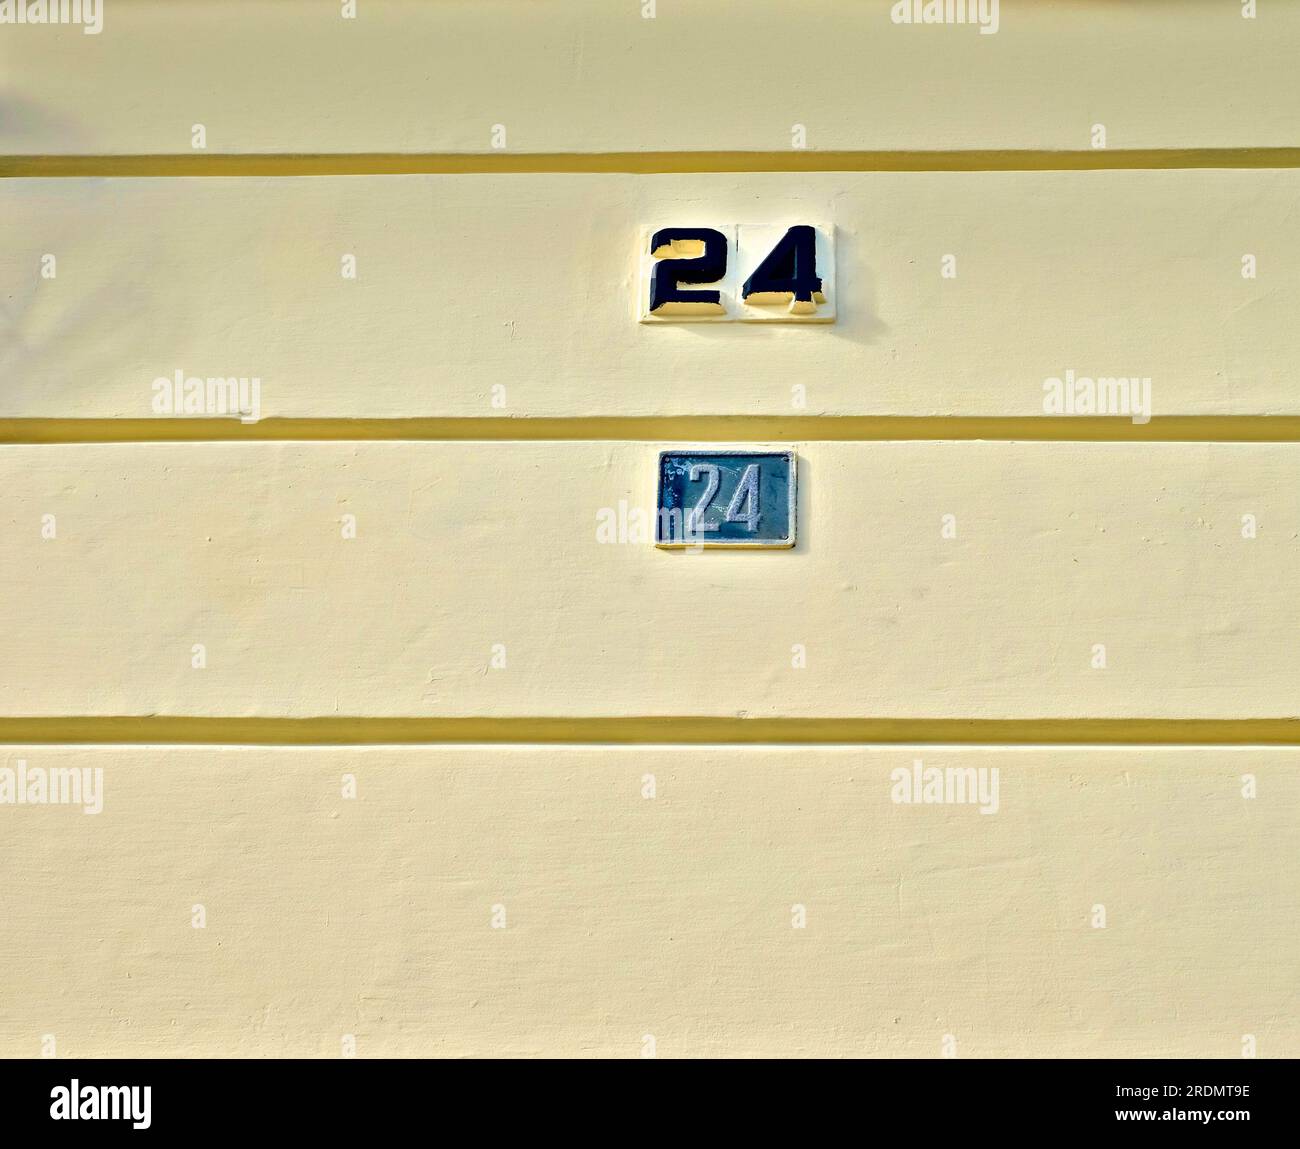 Numbers 24, twenty four, on pale yellow wall. Stock Photo